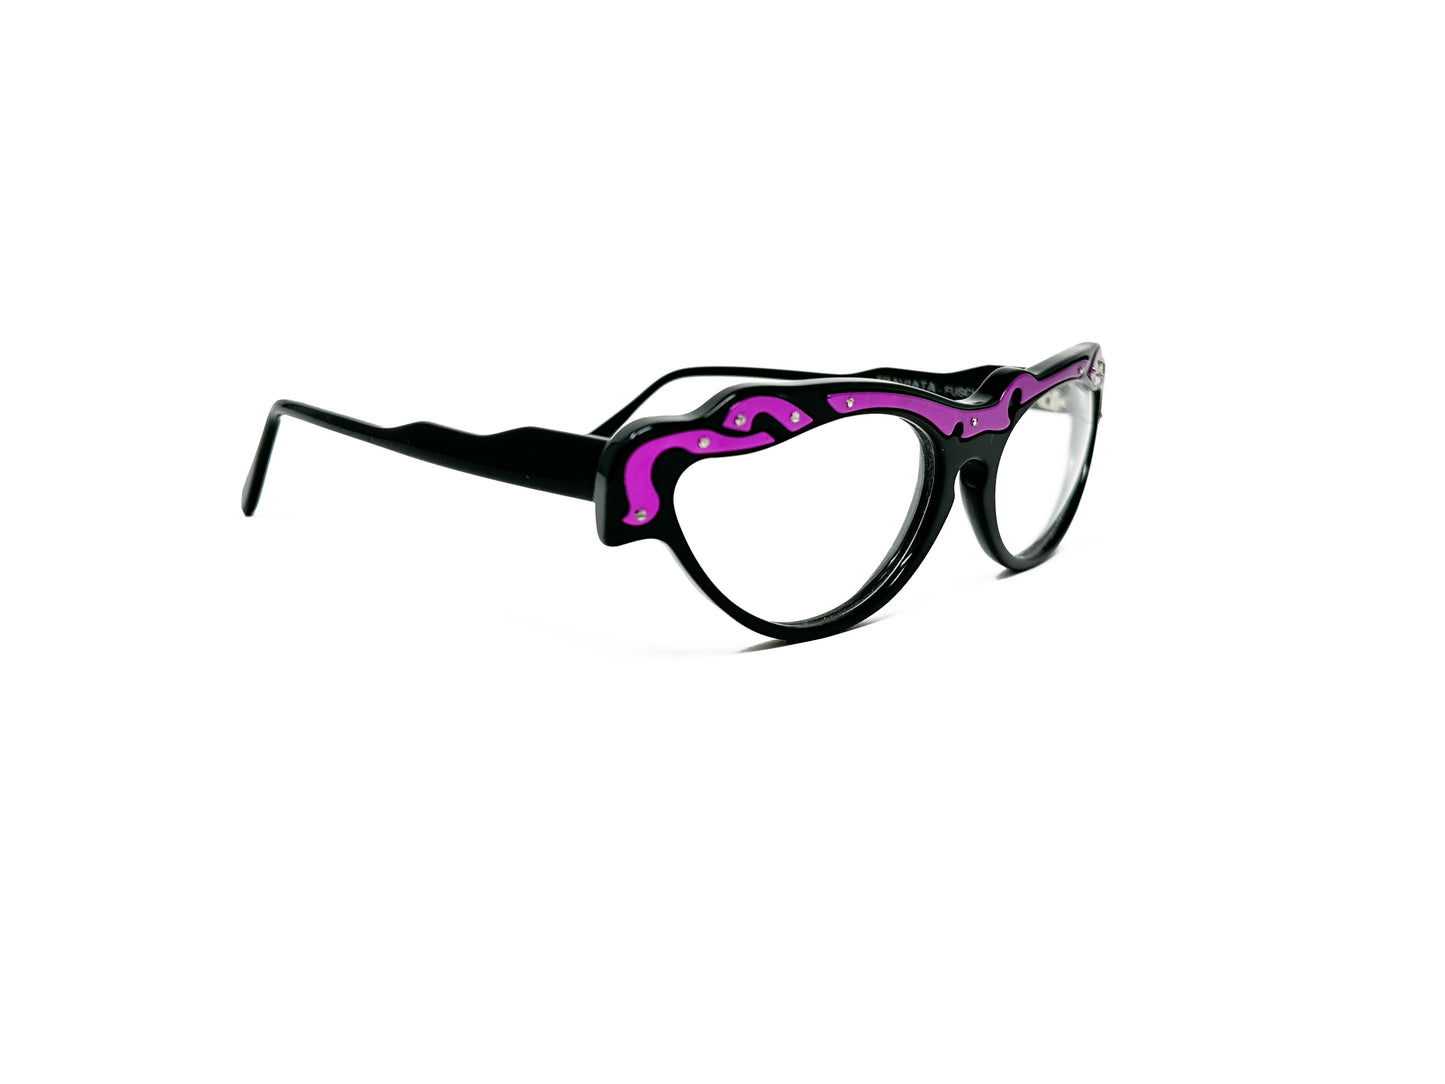 Traction Productions slight cat-eye with straight across top optical frame. Model: Traviata. Color: Fuschia - Black bottom with Fuschia swirls on top with silver screws. Side view.